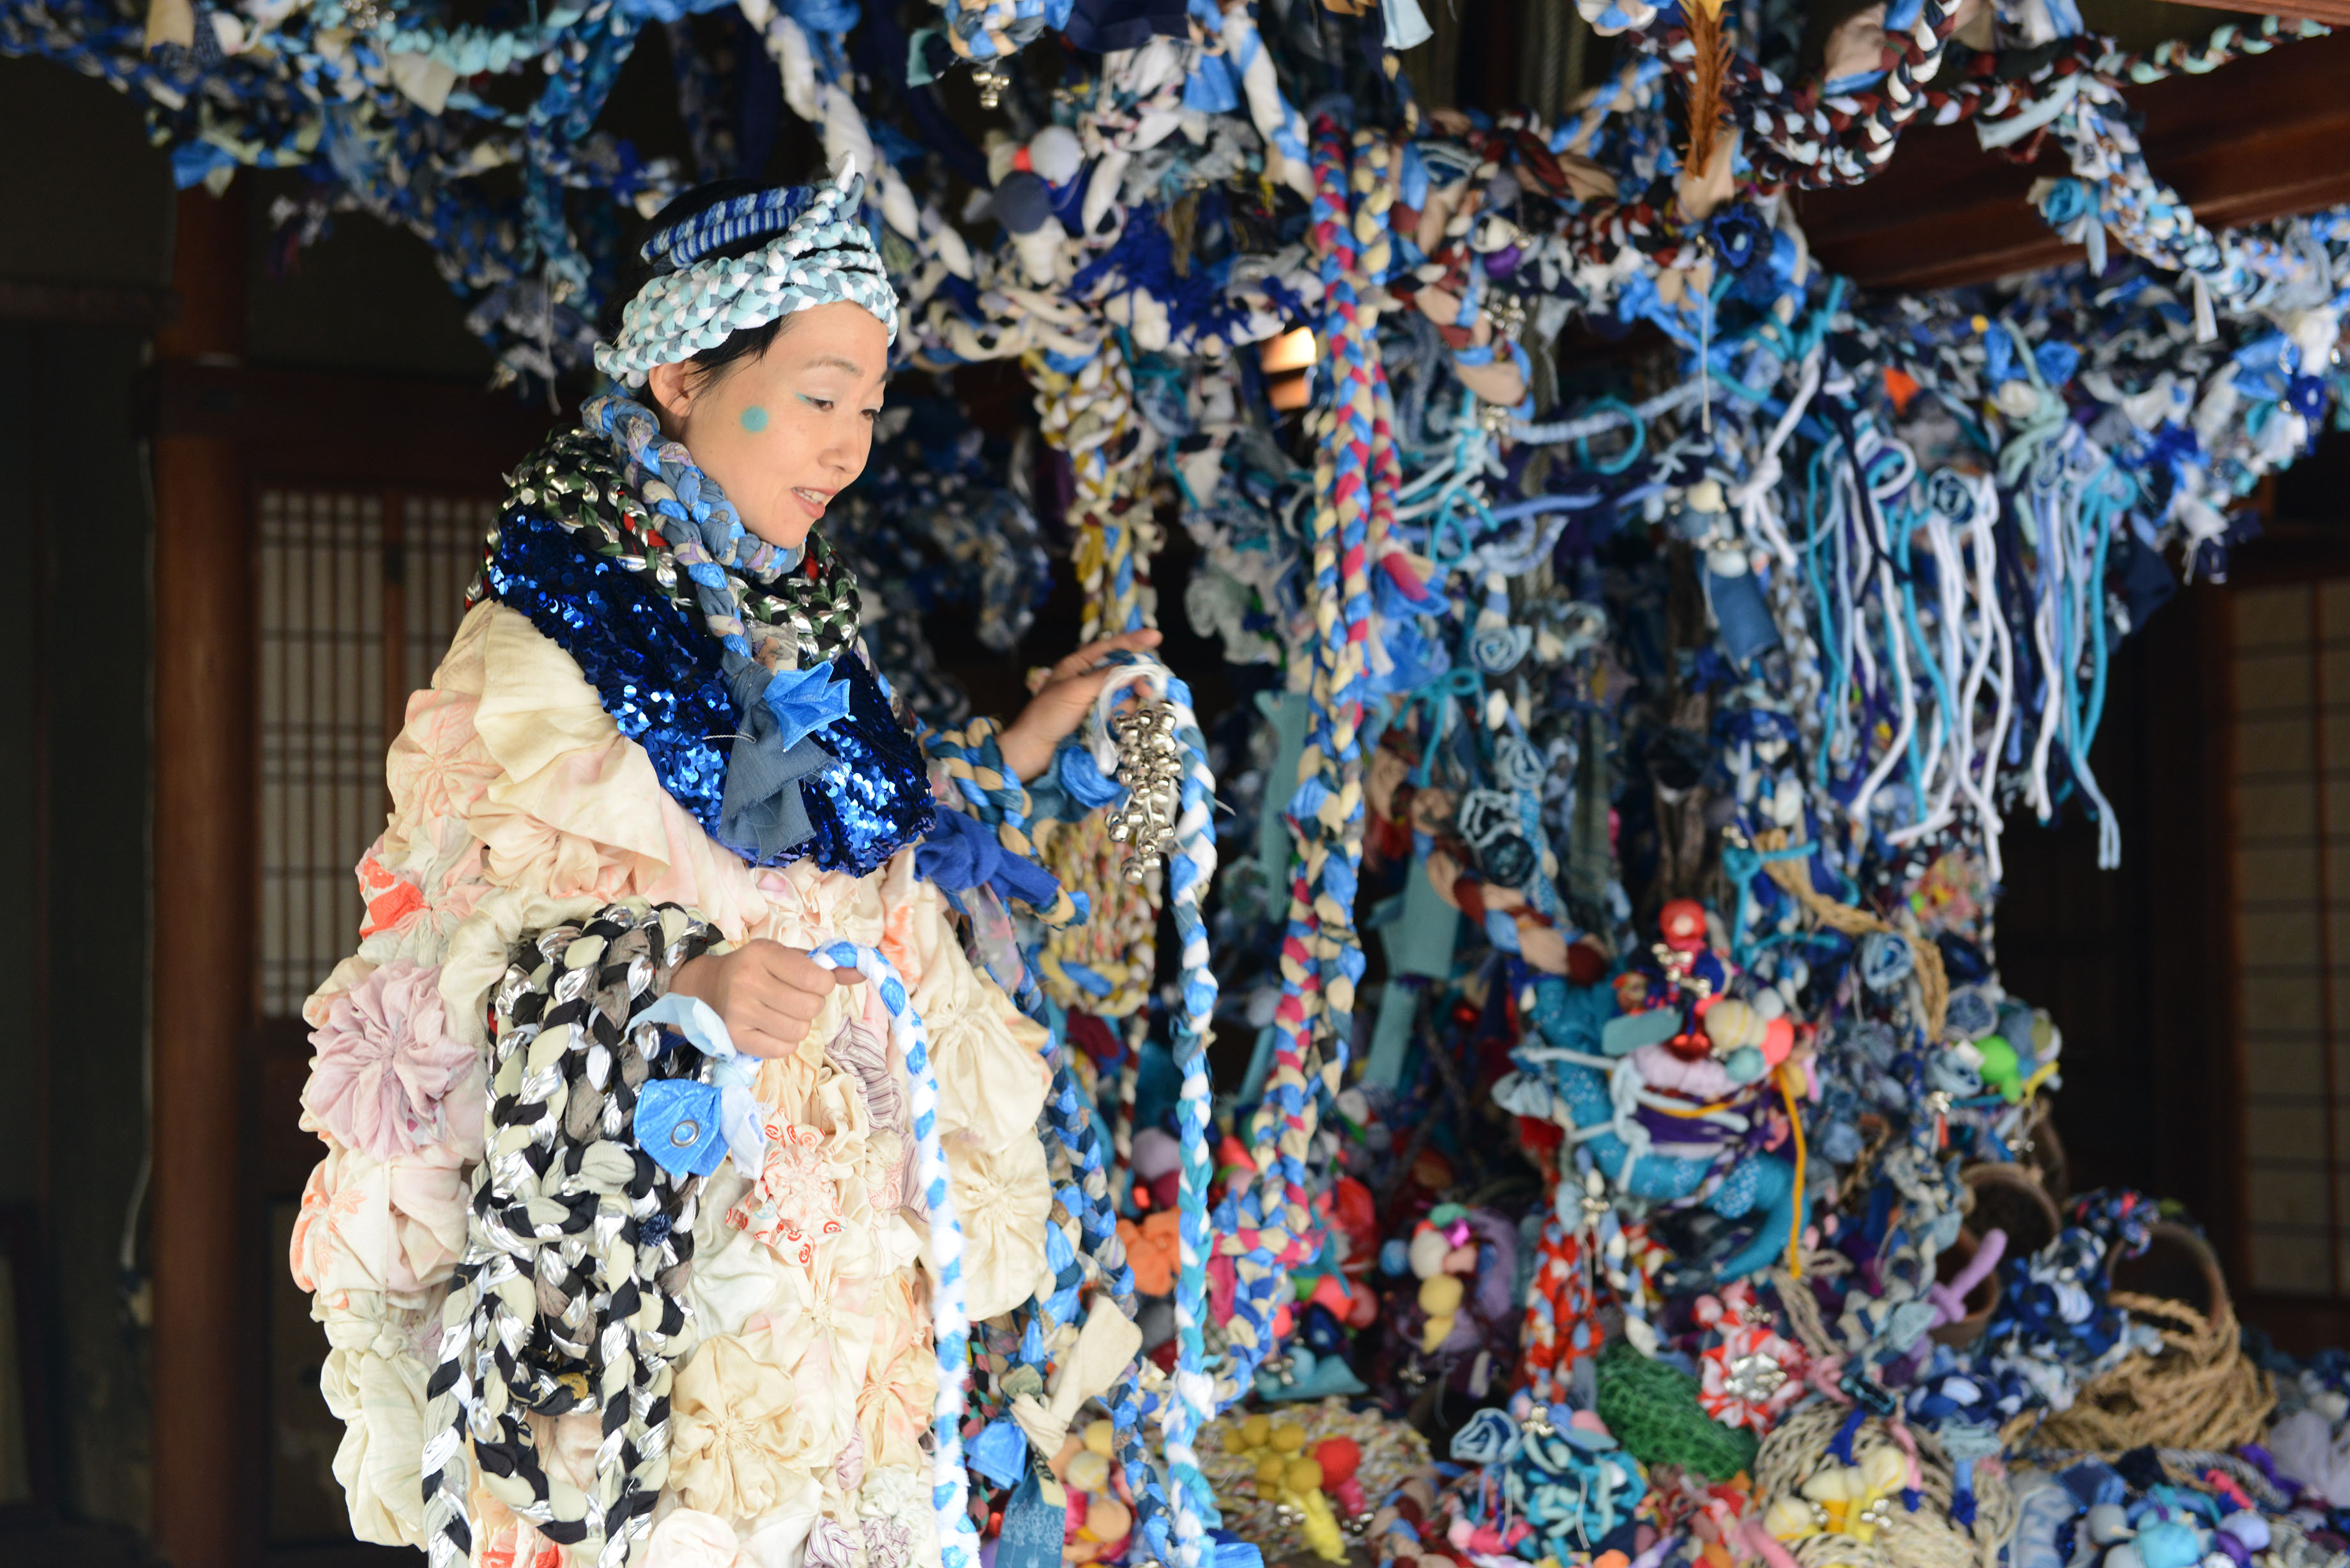 A japanese woman in an elaborate costume walking around a tree like sculpture made from blue fabrics.